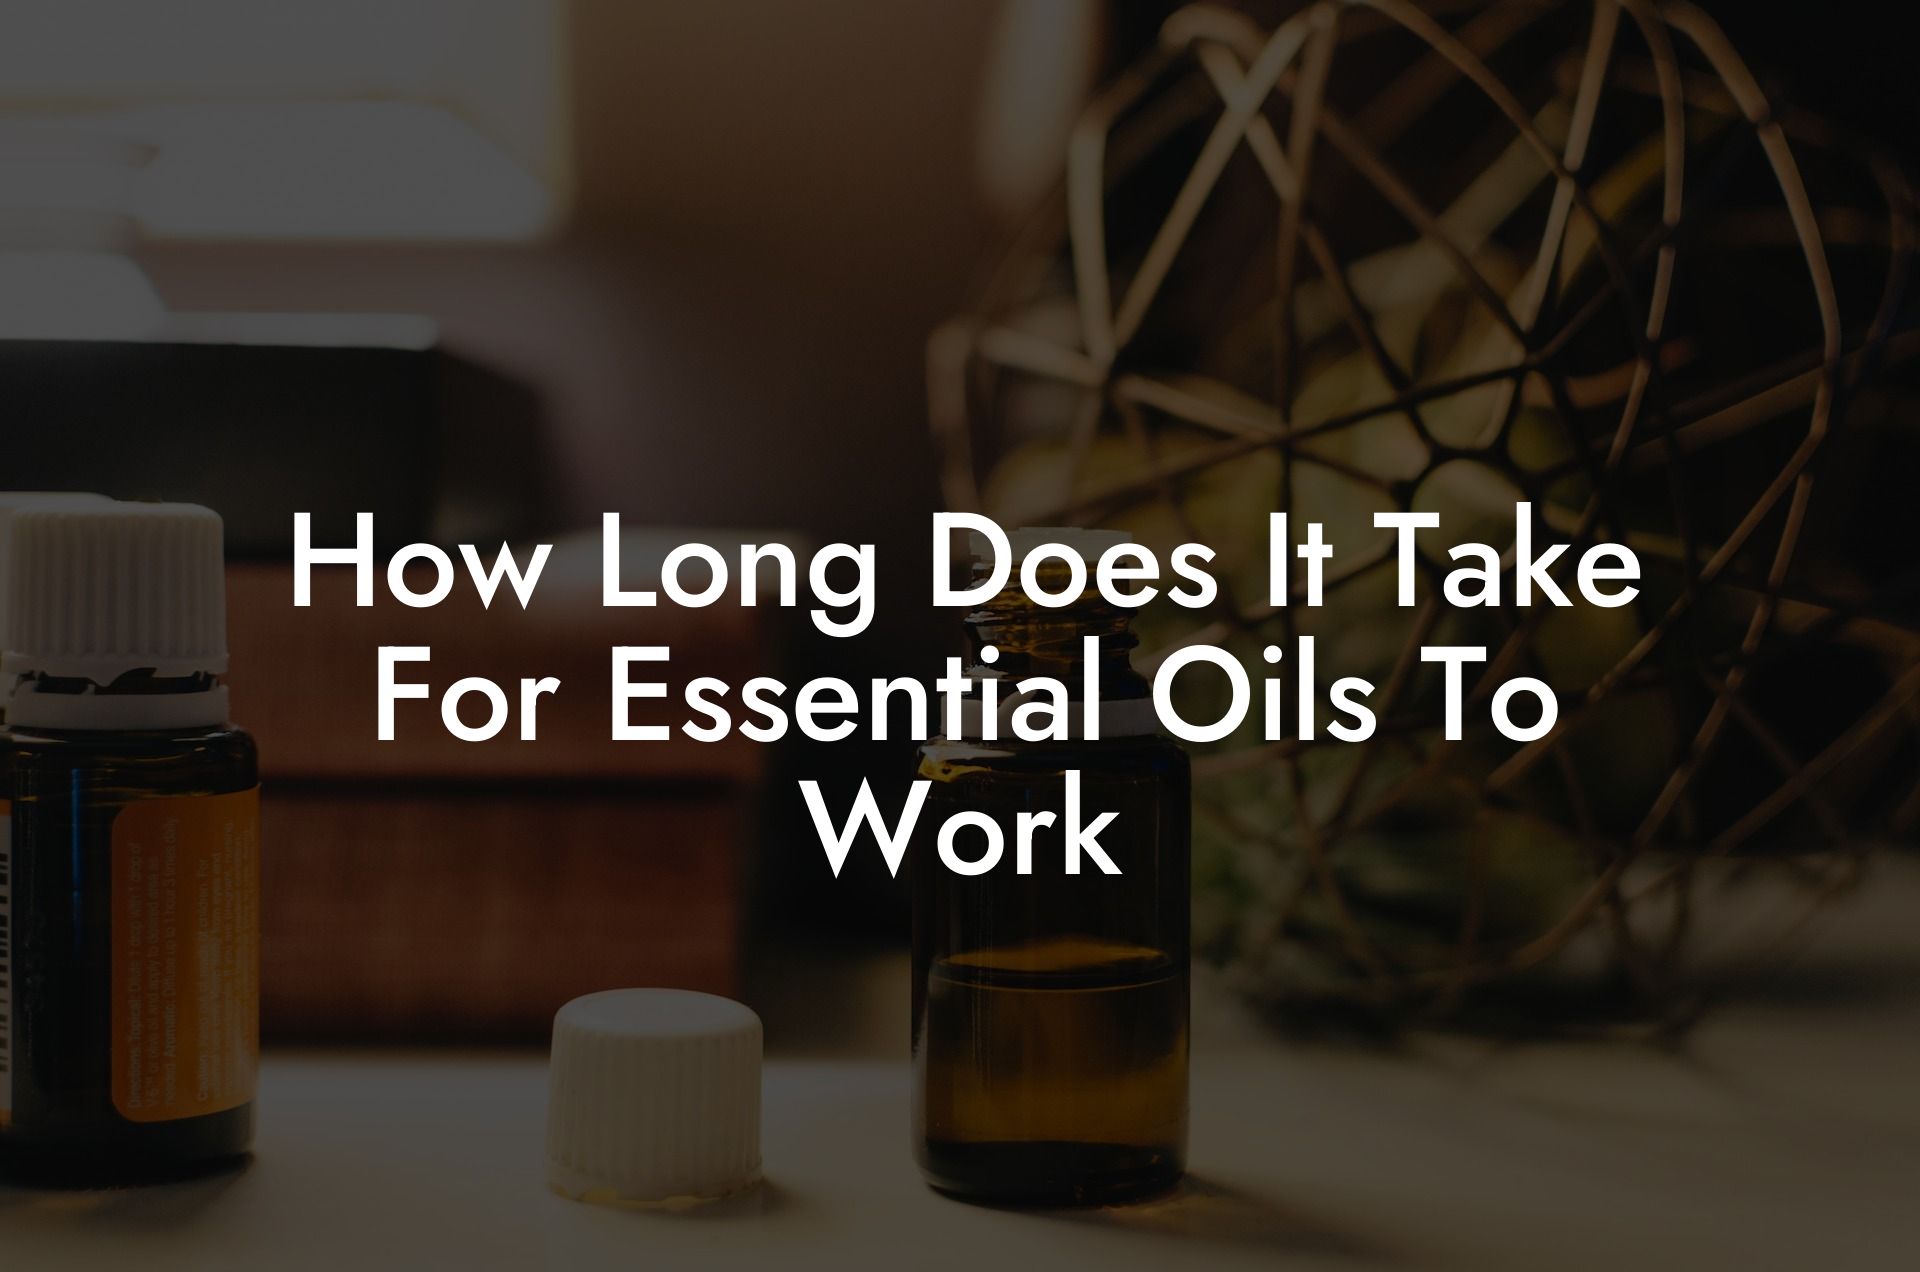 How Long Does It Take For Essential Oils To Work